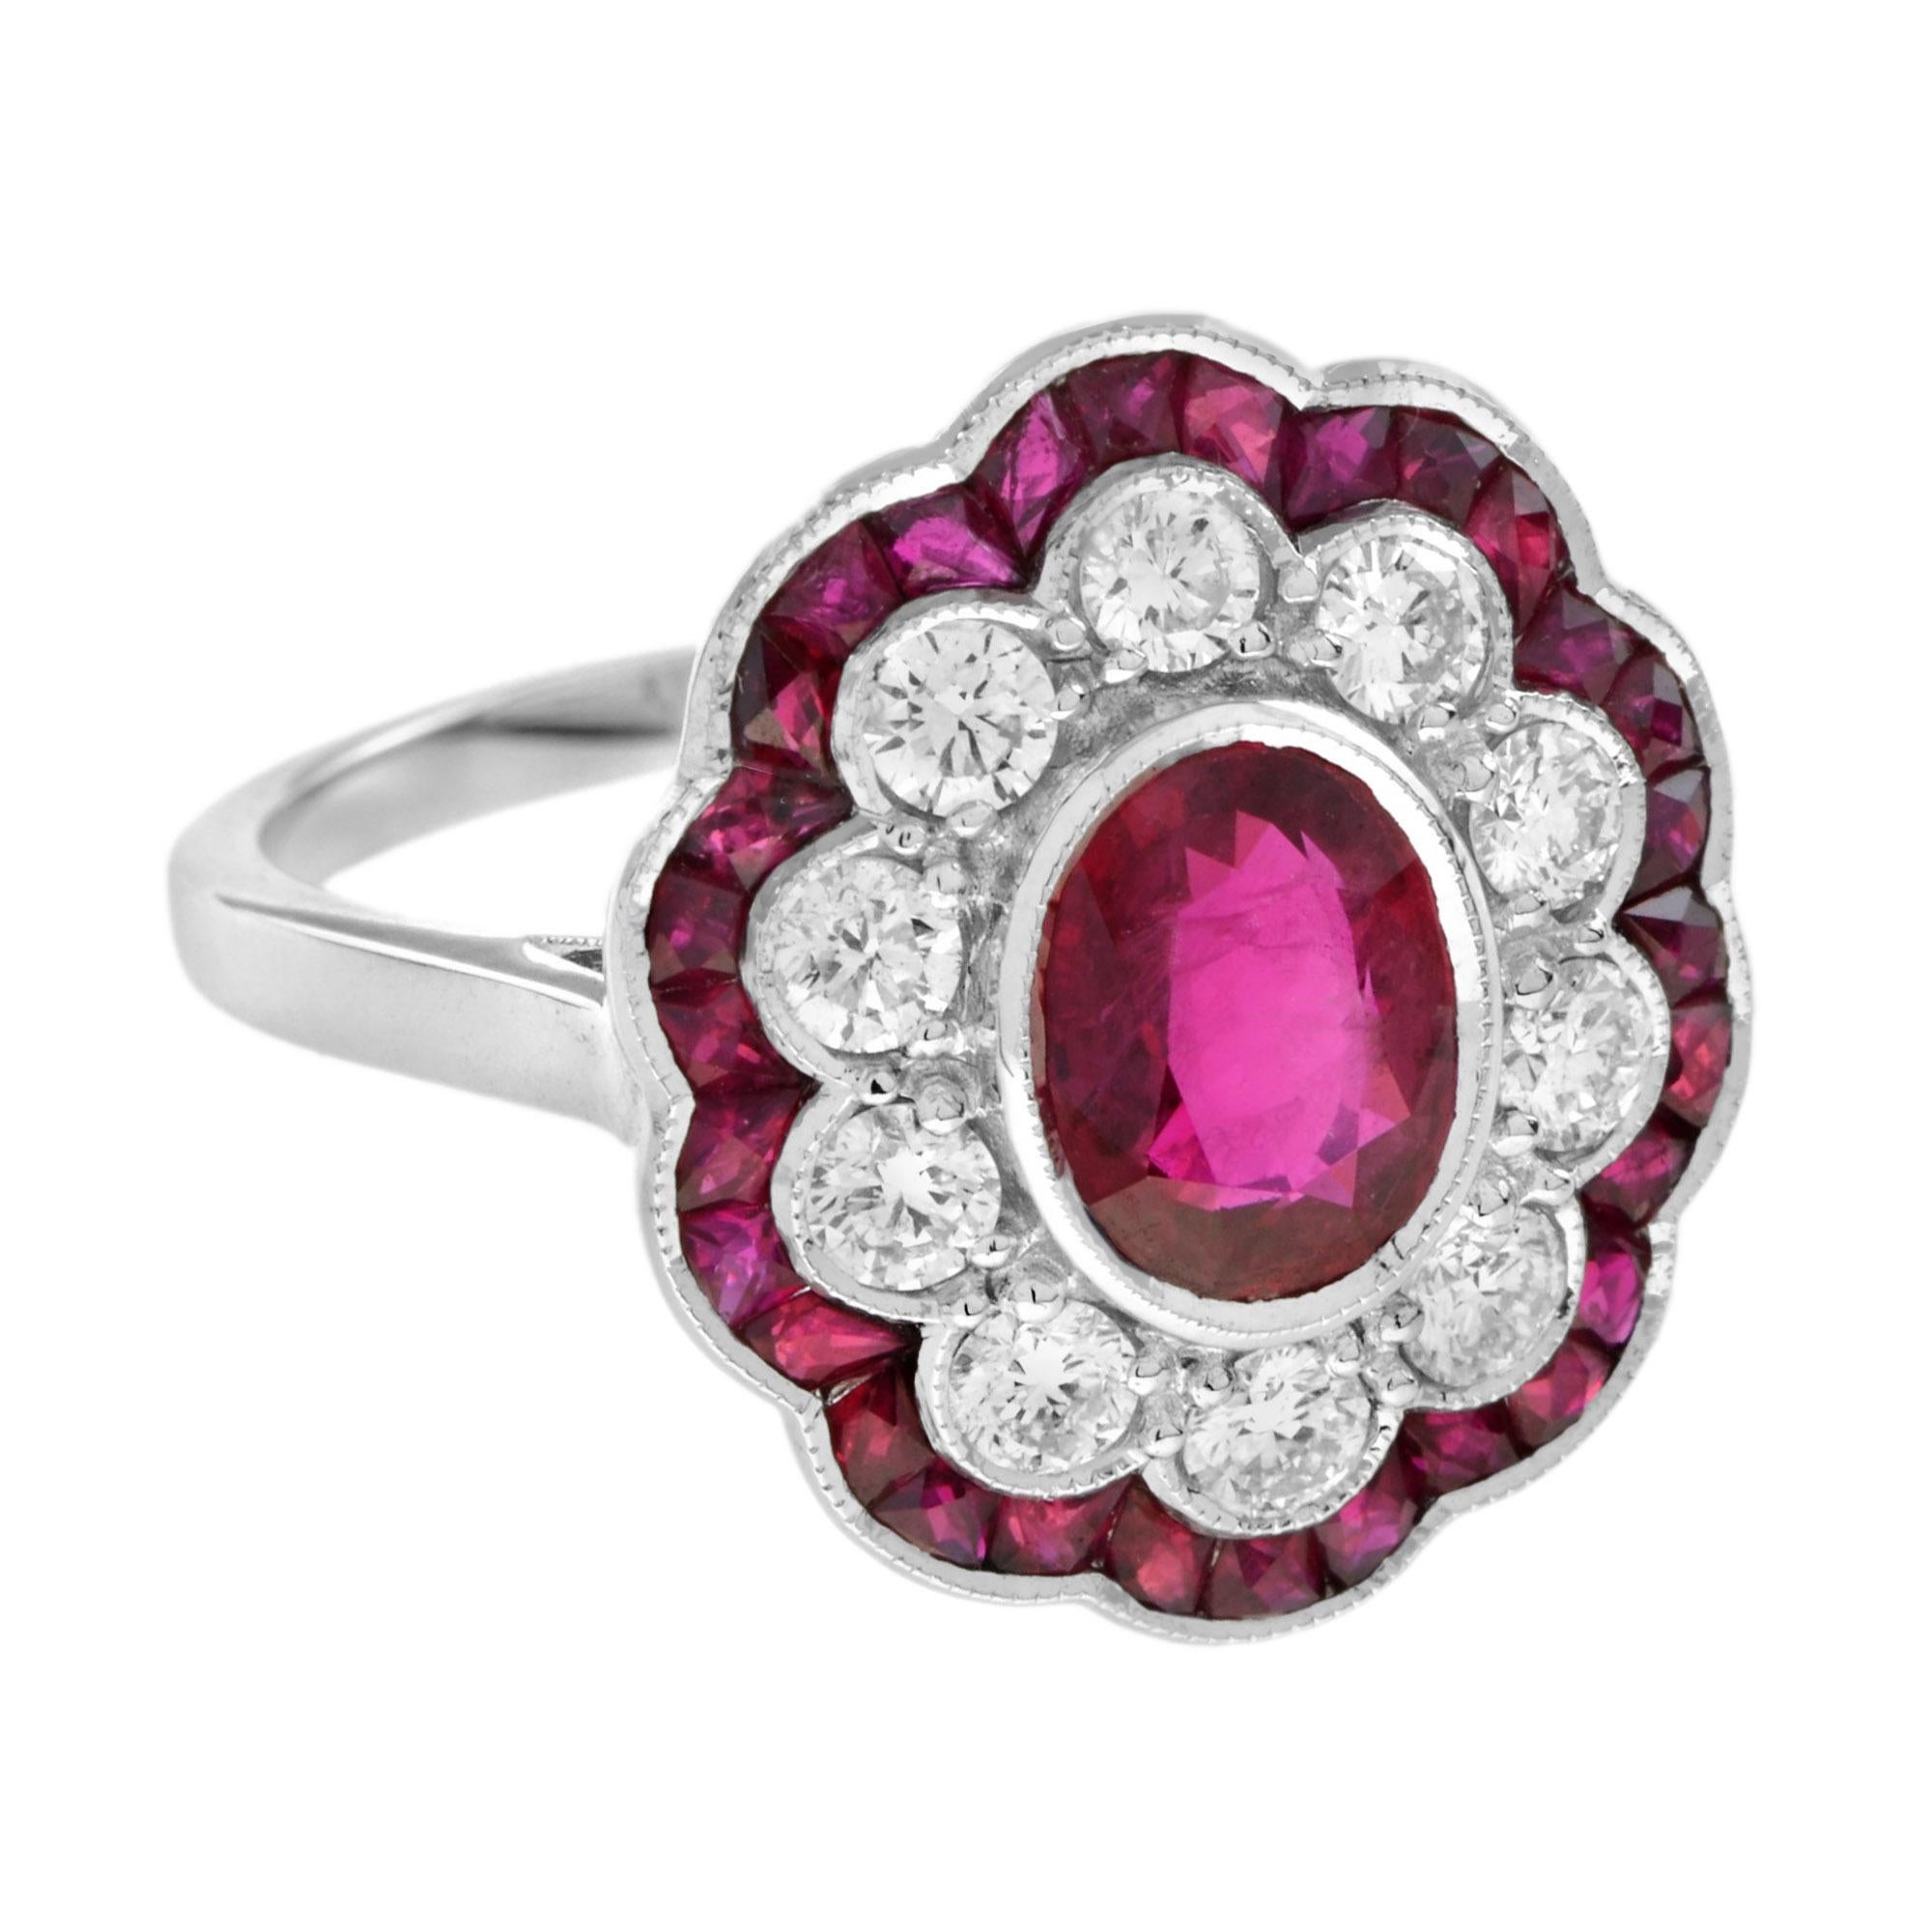 Sublime and imposing Art Deco style ring set in its center with a natural no-heated Siamese ruby weighting about 1.37 carat. It is surrounded by old fashioned diamonds, also of a very beautiful H/SI quality. A second setting increases the volume of